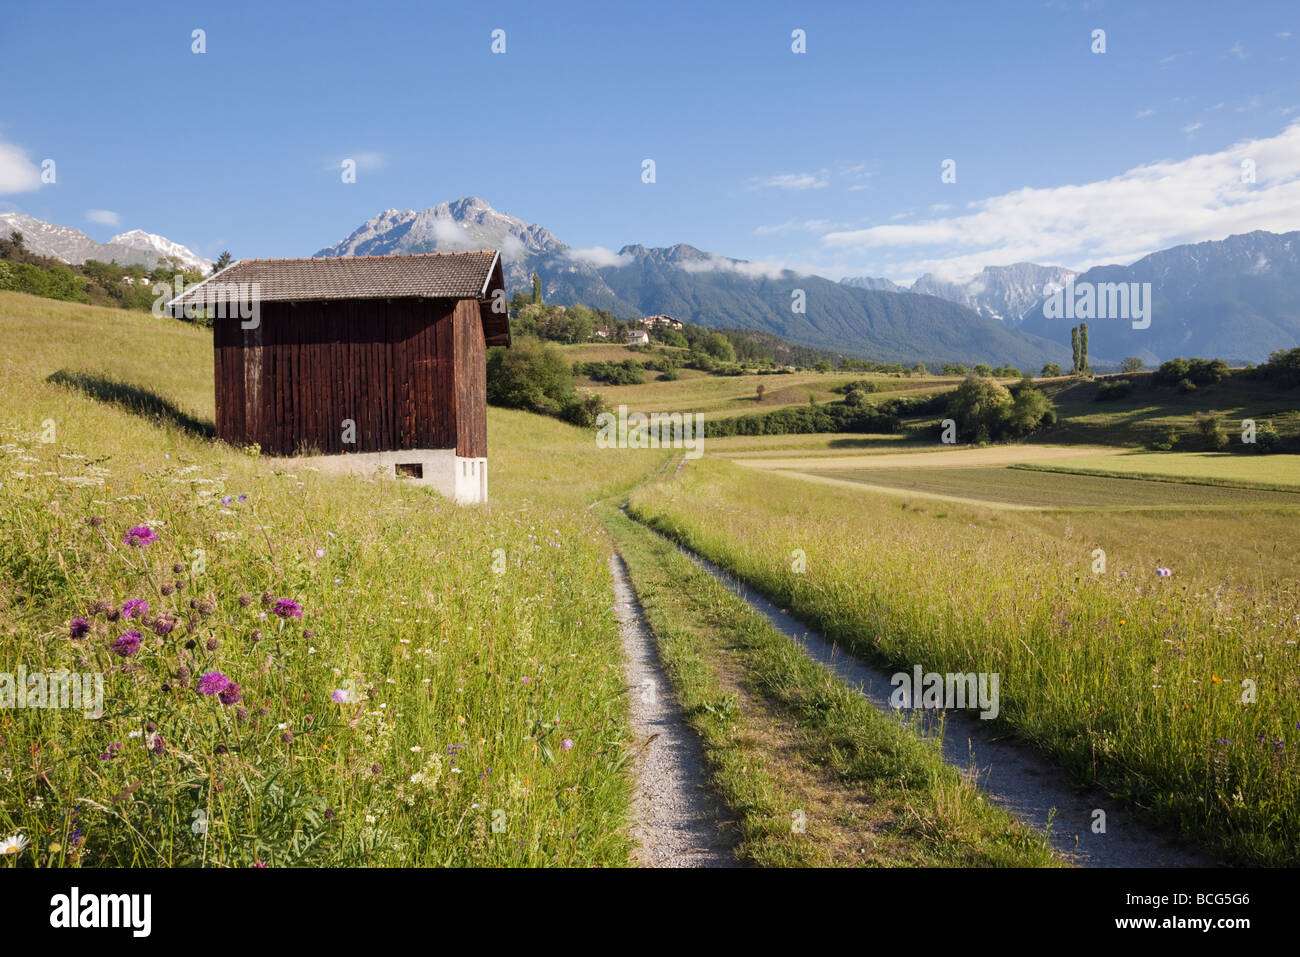 Imst Tyrol Austria Europe June Track and barn in summer Alpine flower meadows in green valley Stock Photo